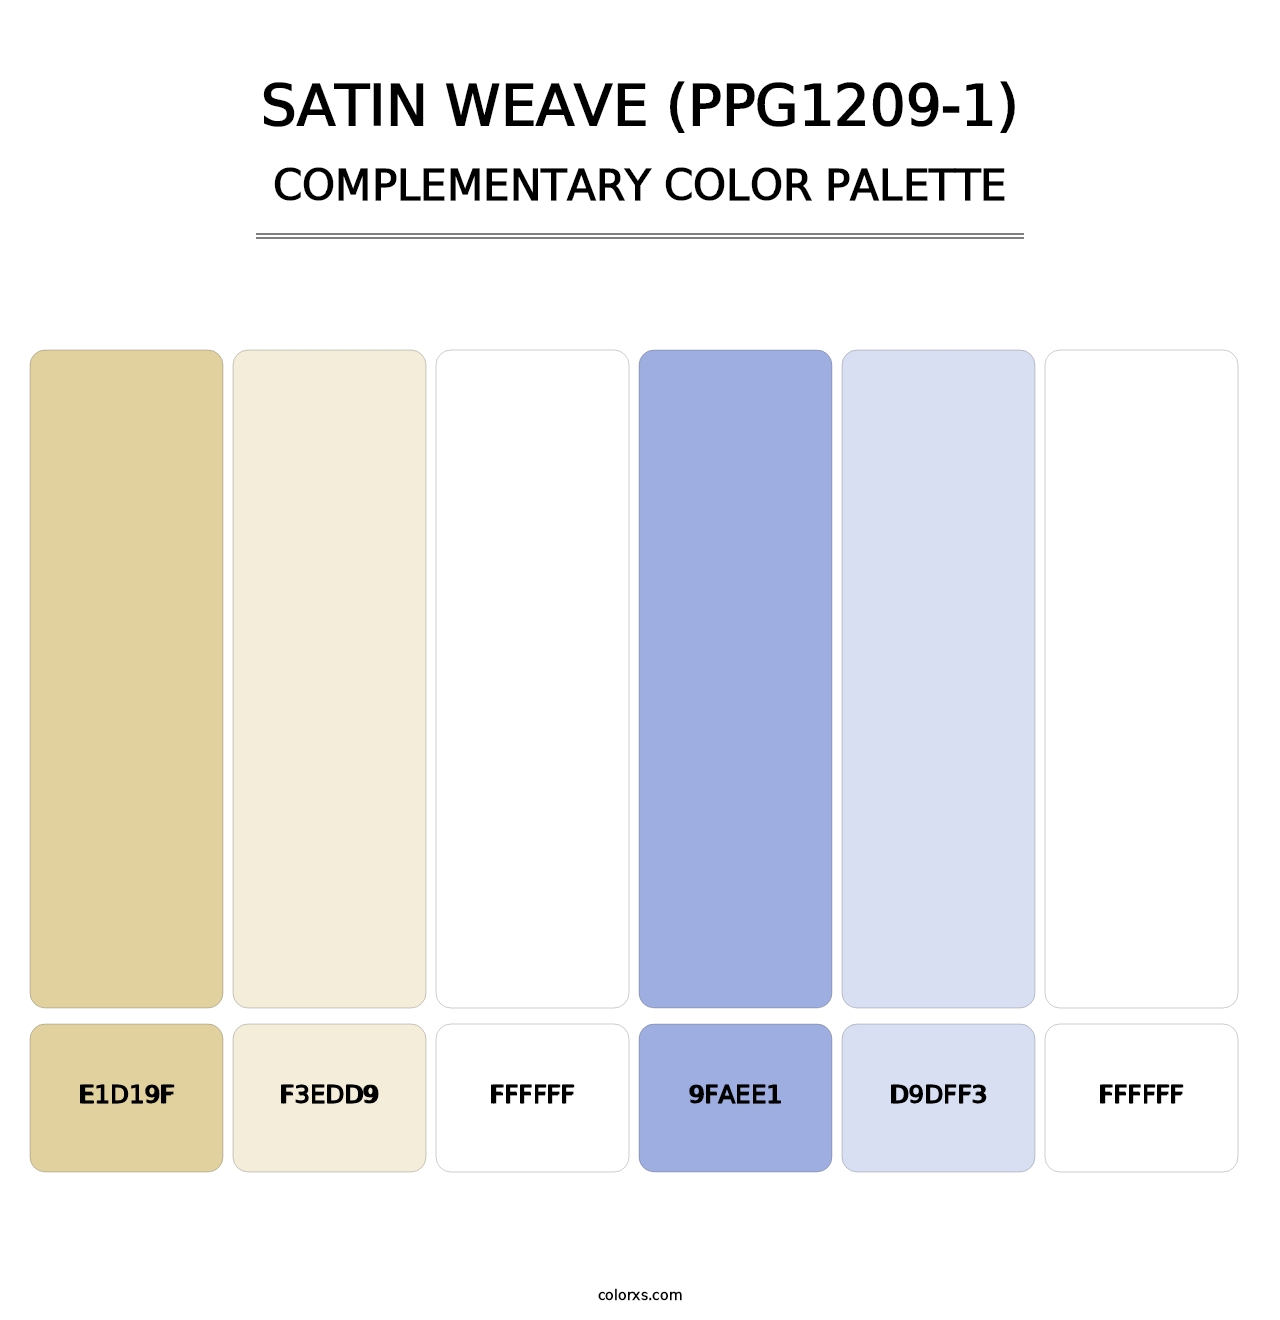 Satin Weave (PPG1209-1) - Complementary Color Palette